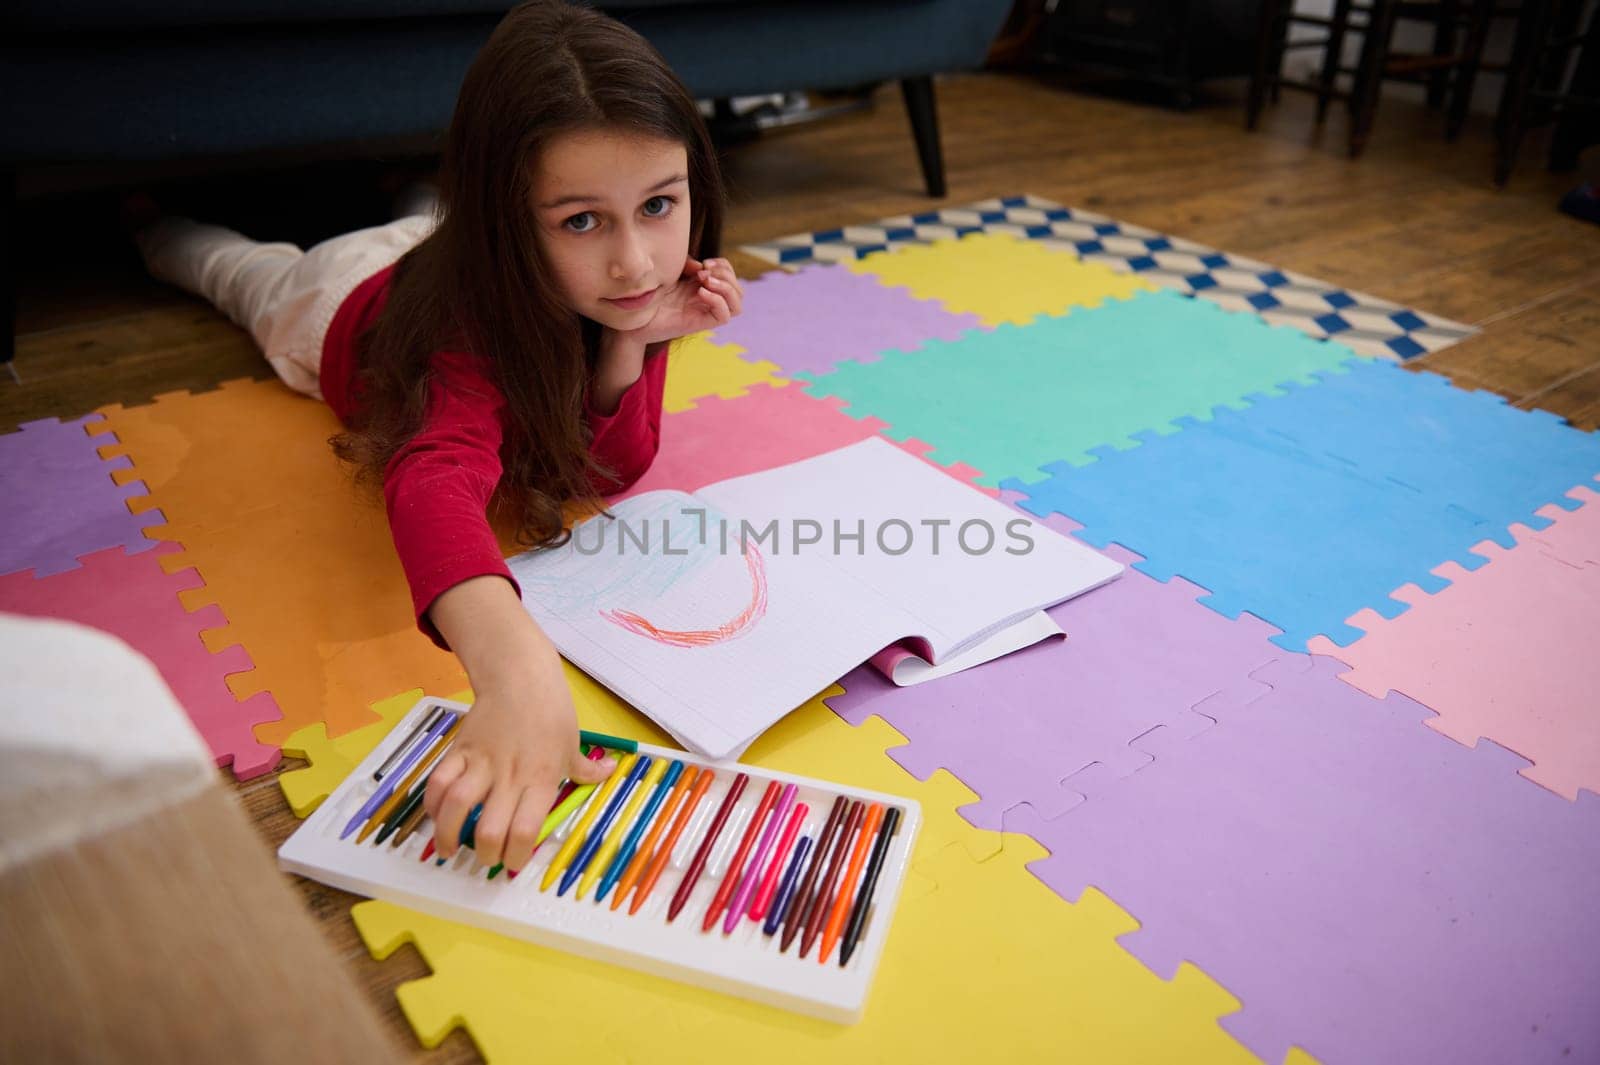 Little kid girl smiling looking at camera while taking a colorful pencil out of a box with pastel crayons, lying on her belly on a multicolored puzzle carpet. People. Education. Back to school concept